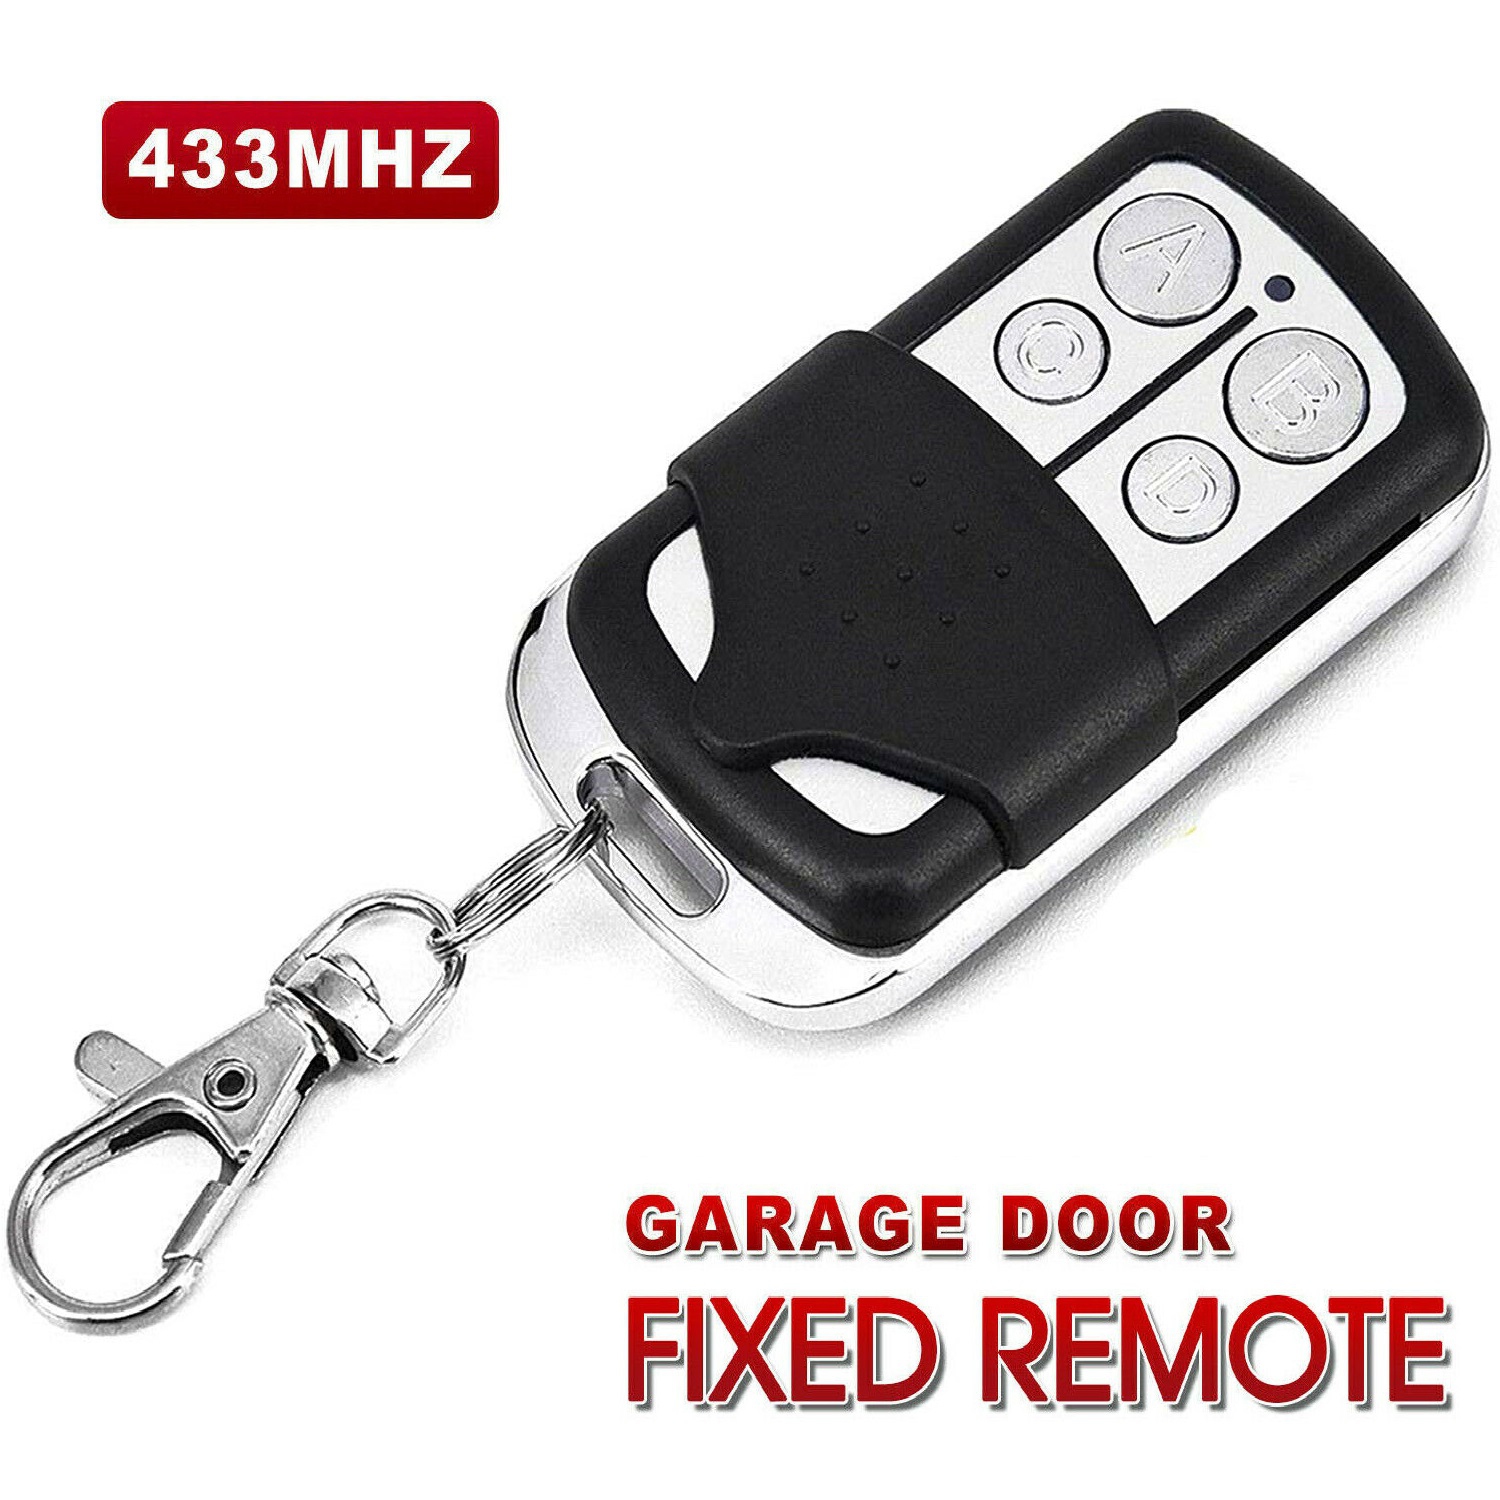 ISTAR Electric Cloning Universal Gate Garage Door Opener Remote Control Fob 433mhz Replacement Key Fob